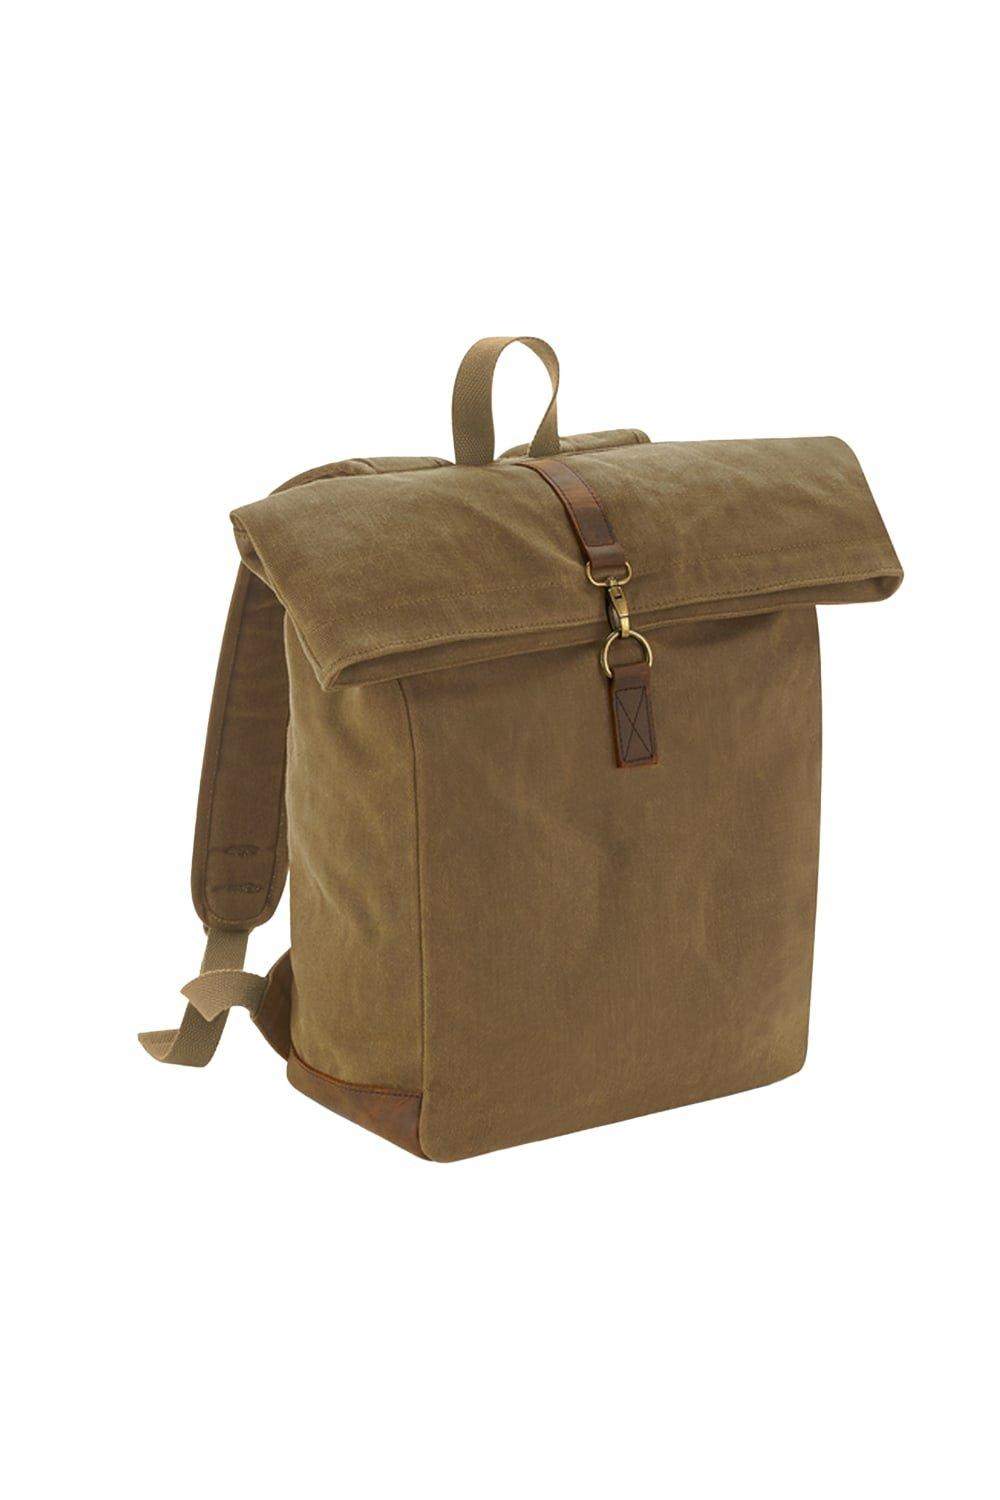 Heritage Waxed Canvas Leather Accent Backpack